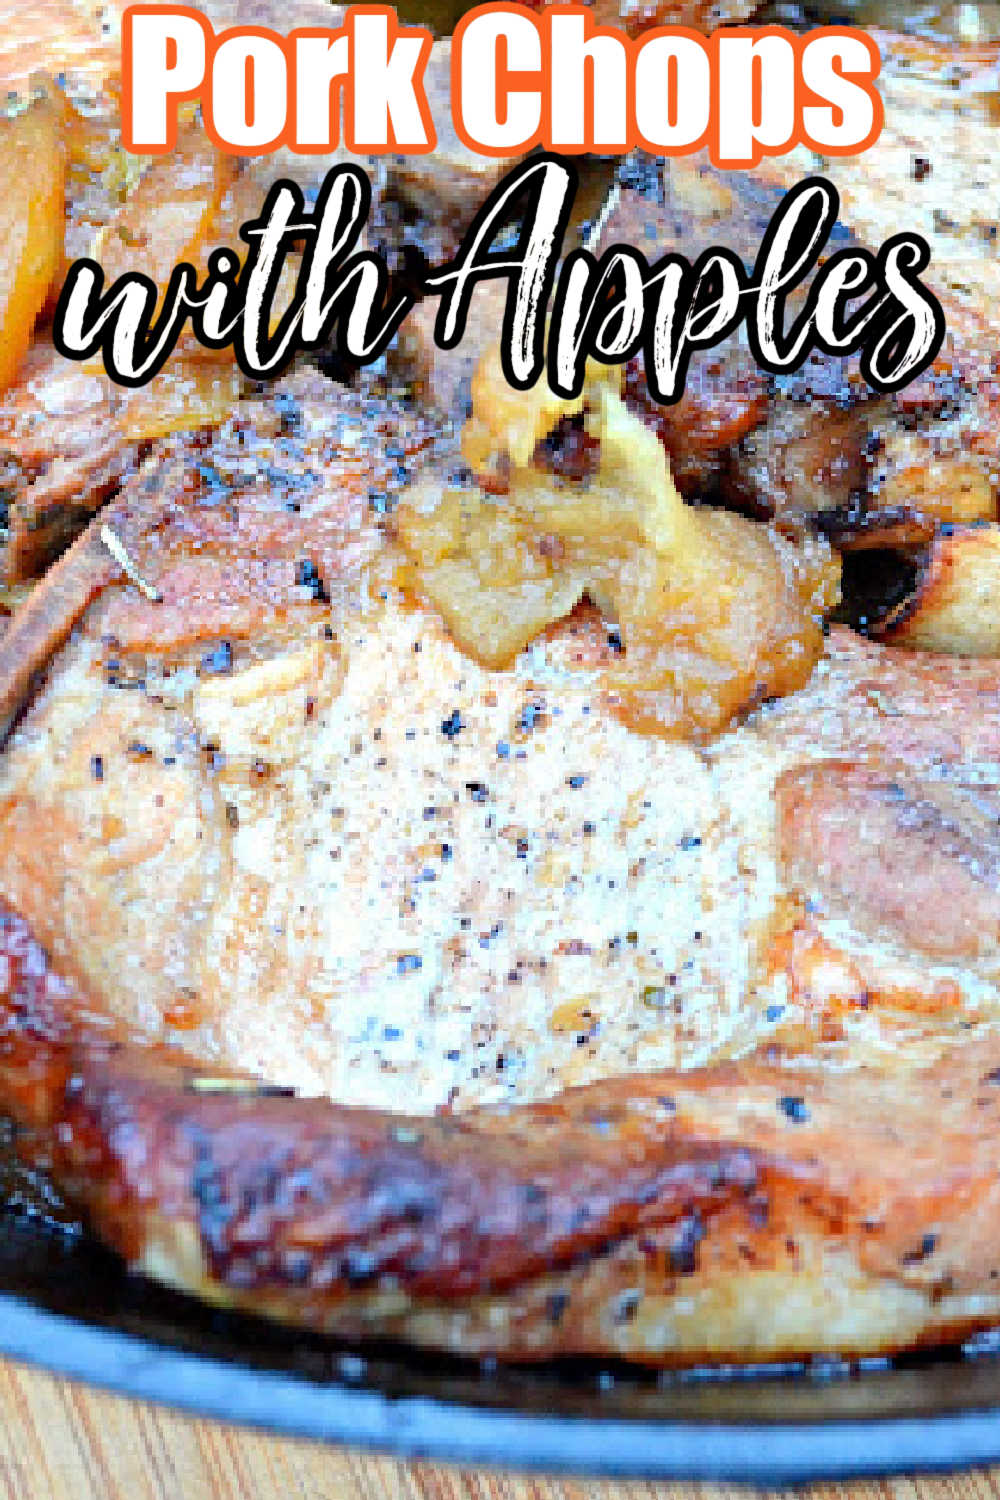 Pork Chops with Apples in a cast iron skillet on a wooden cutting board. White text with orange outline Pork Chops at the top and black text below it with apples.